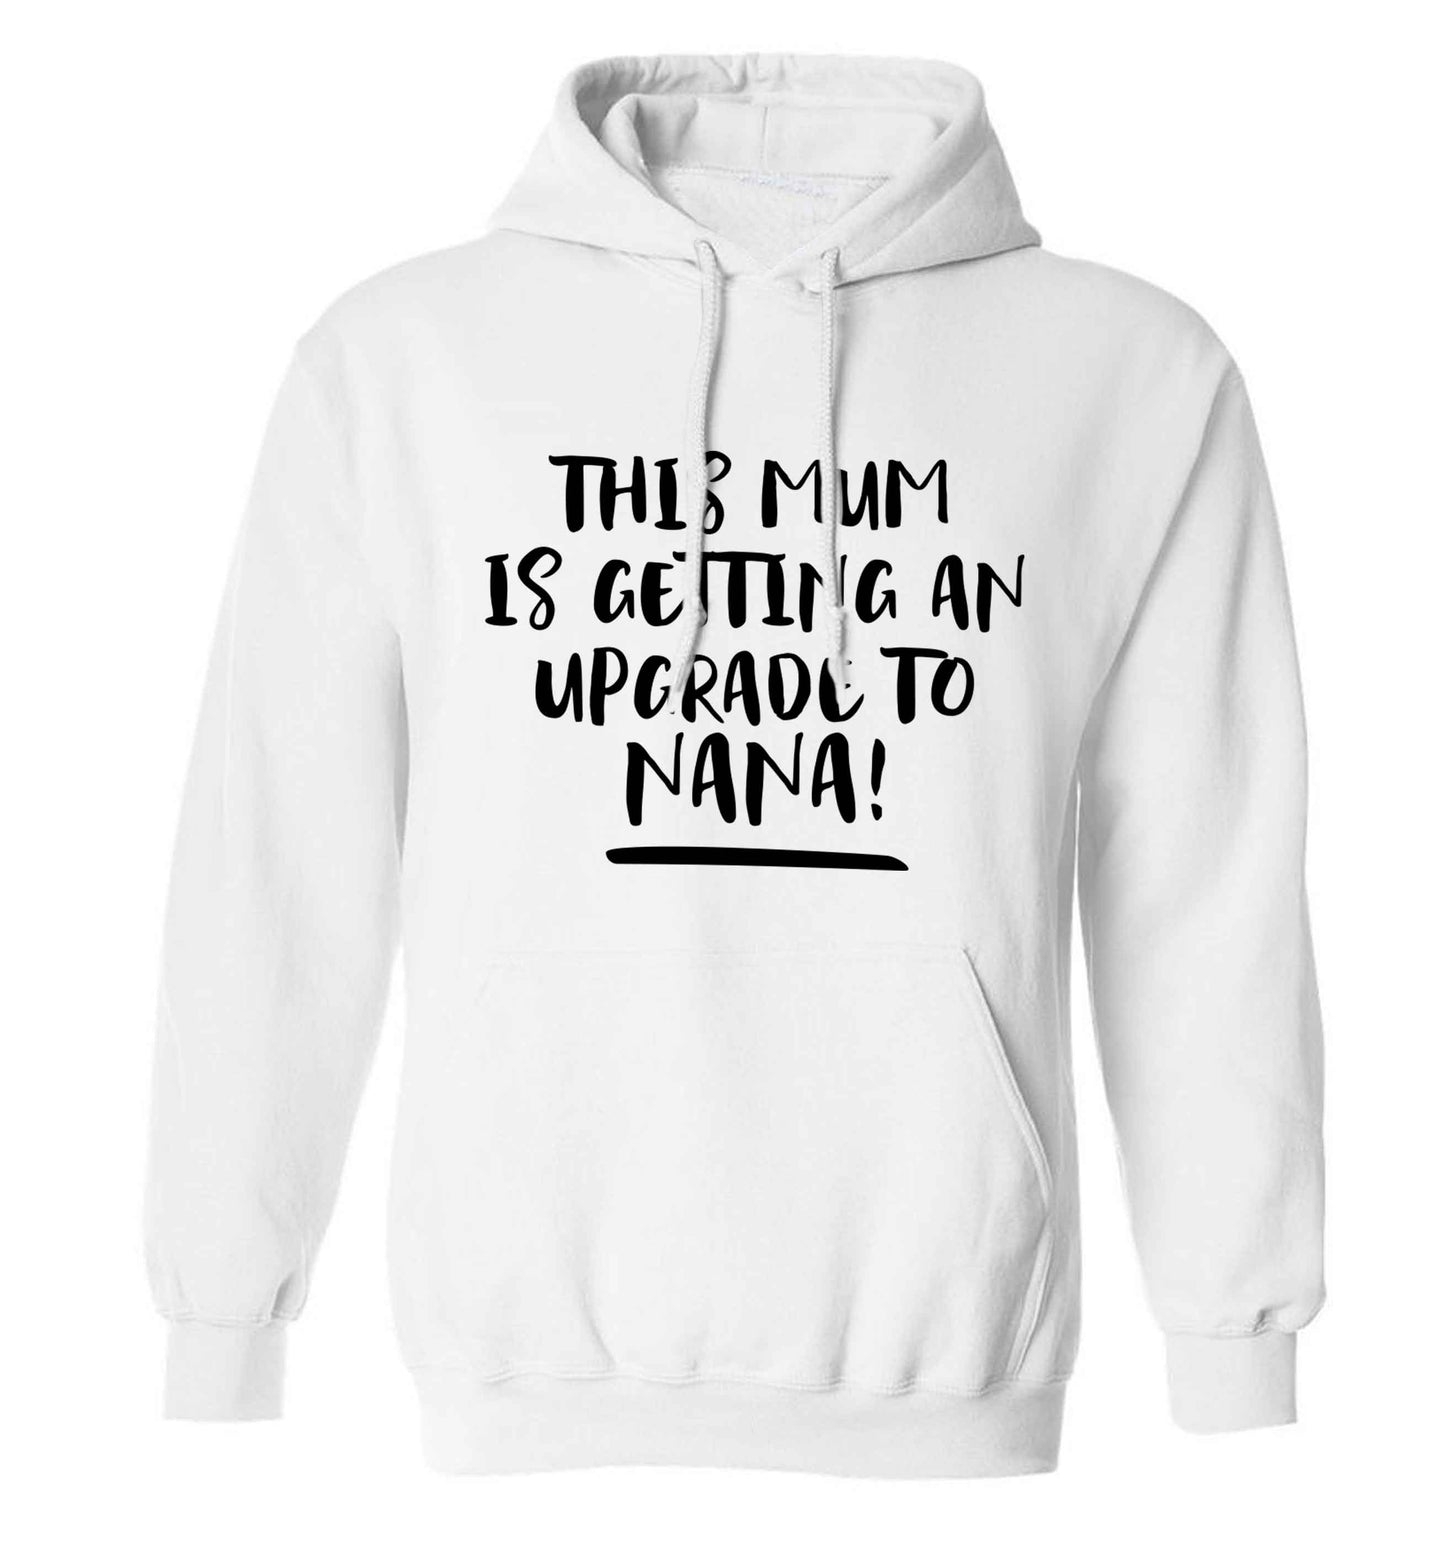 This mum is getting an upgrade to nana! adults unisex white hoodie 2XL